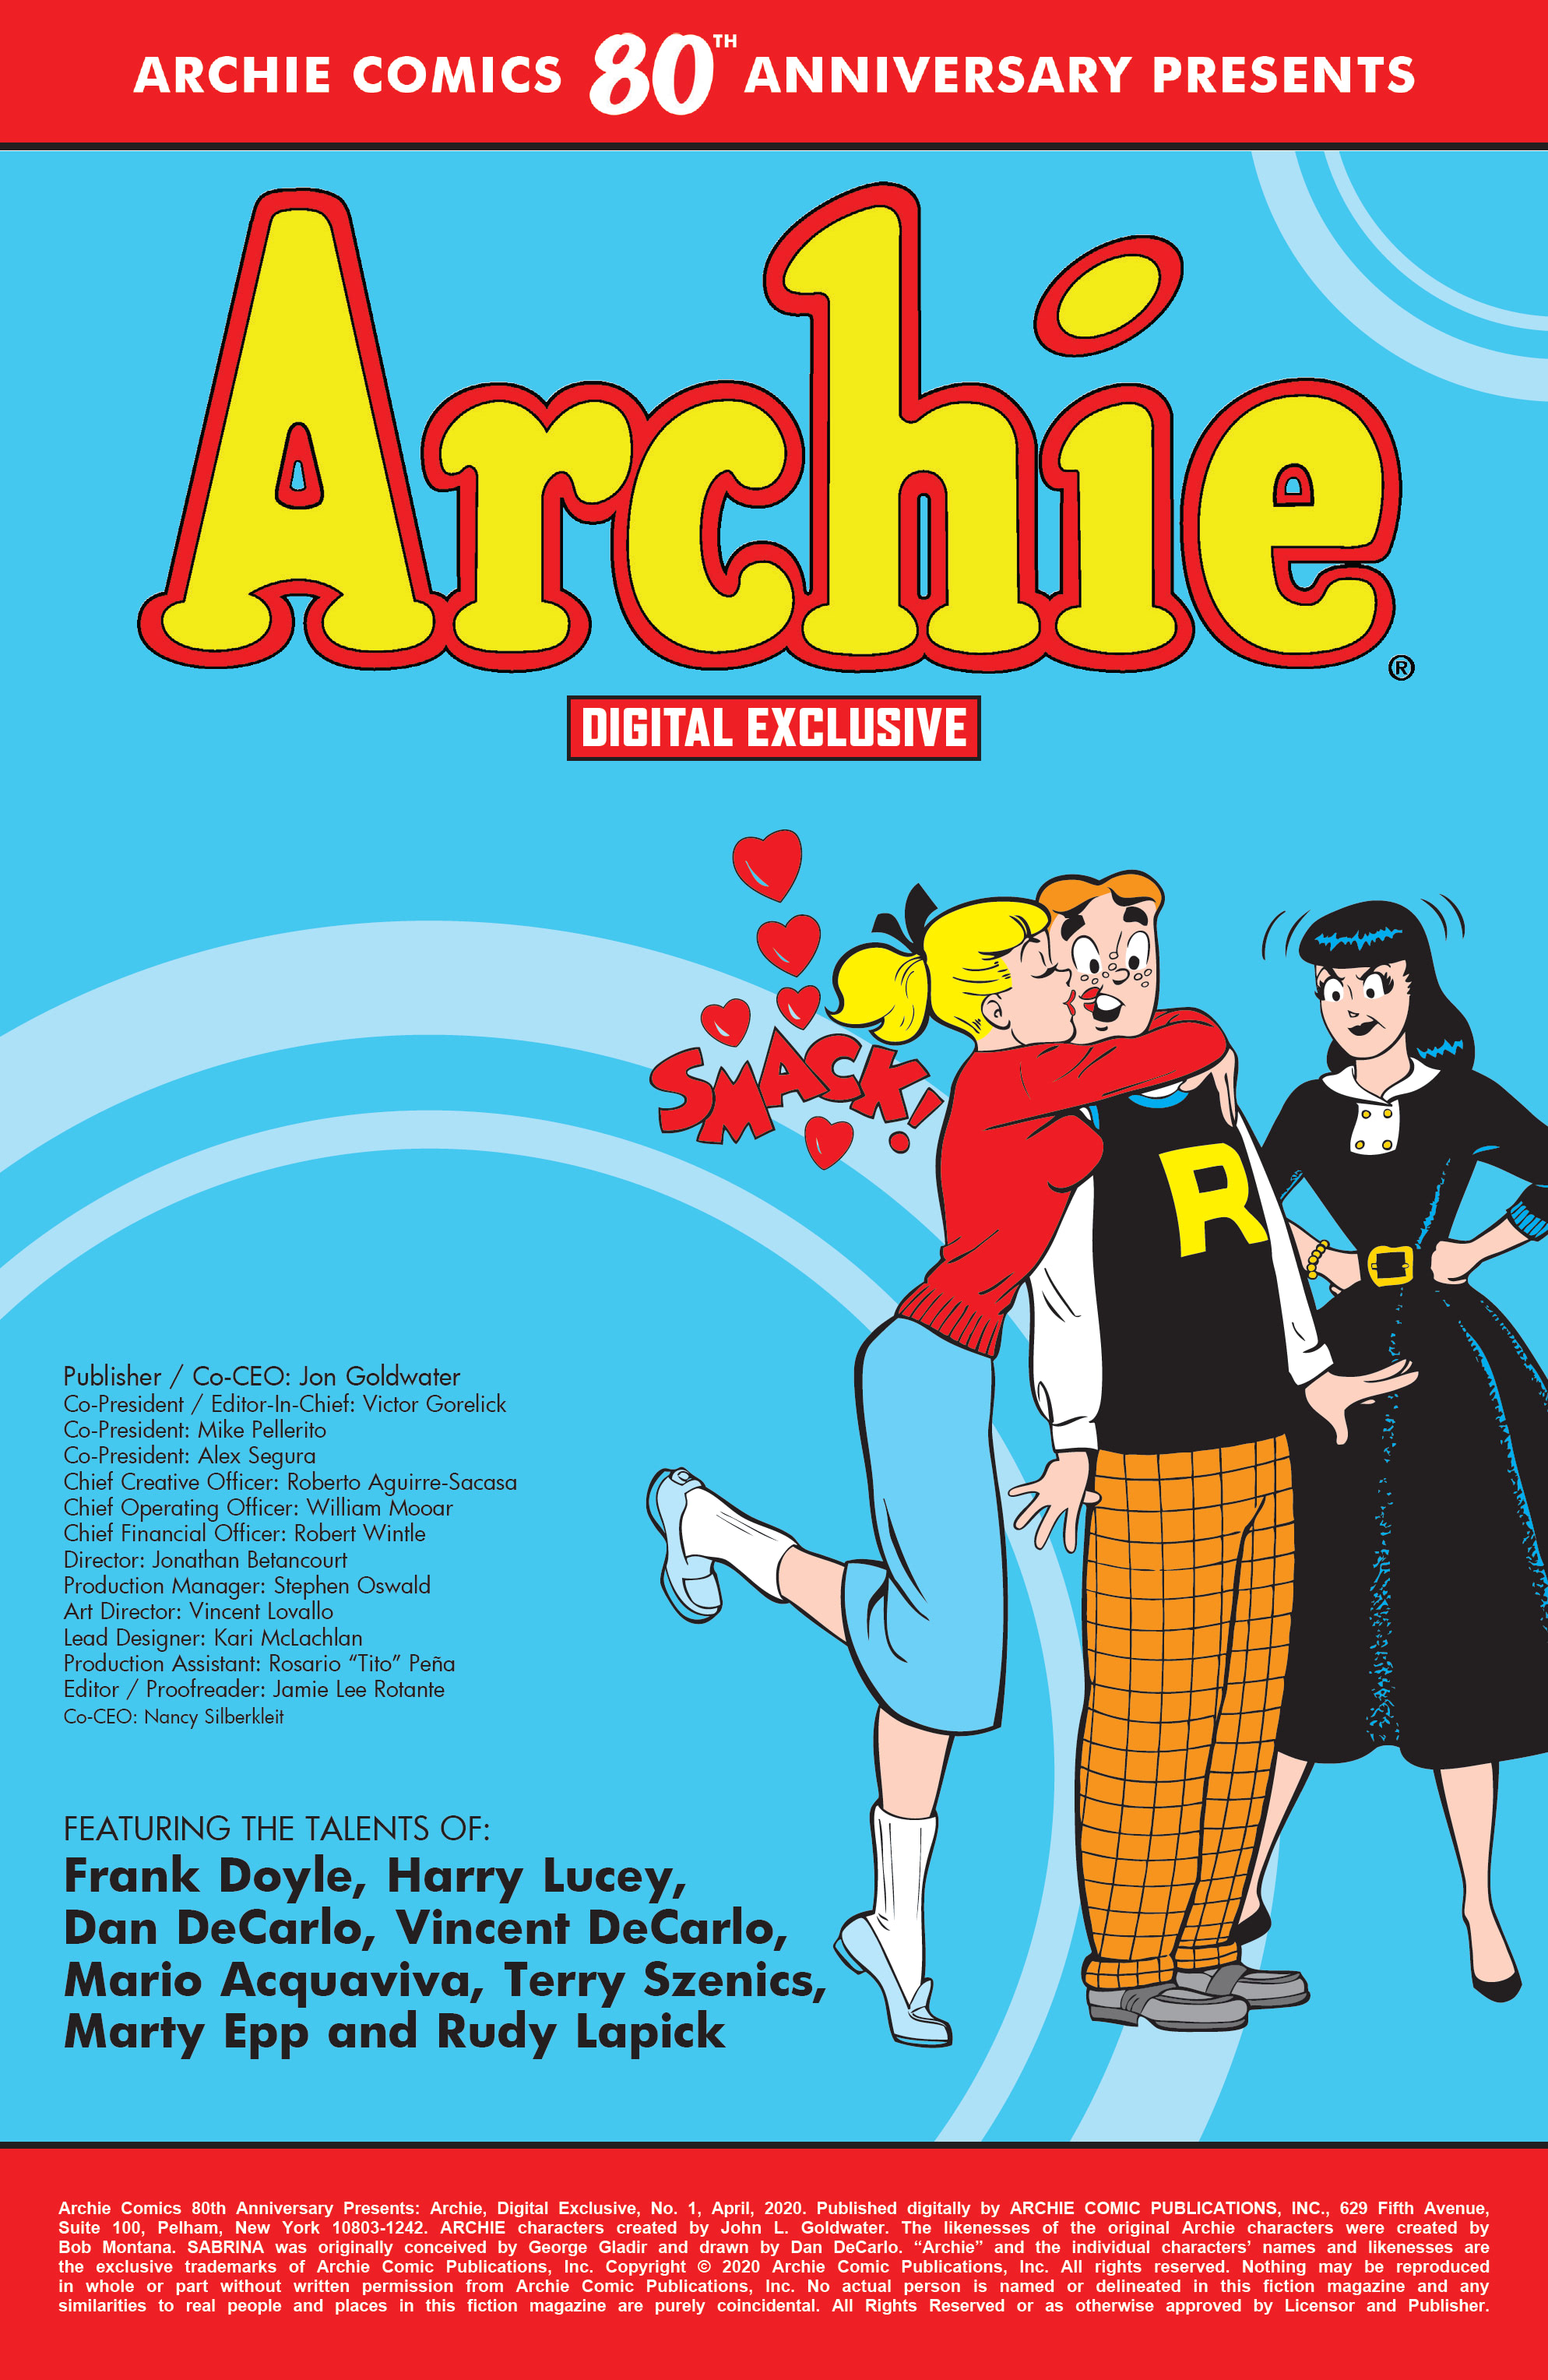 Read online Archie Comics 80th Anniversary Presents comic -  Issue #1 - 2